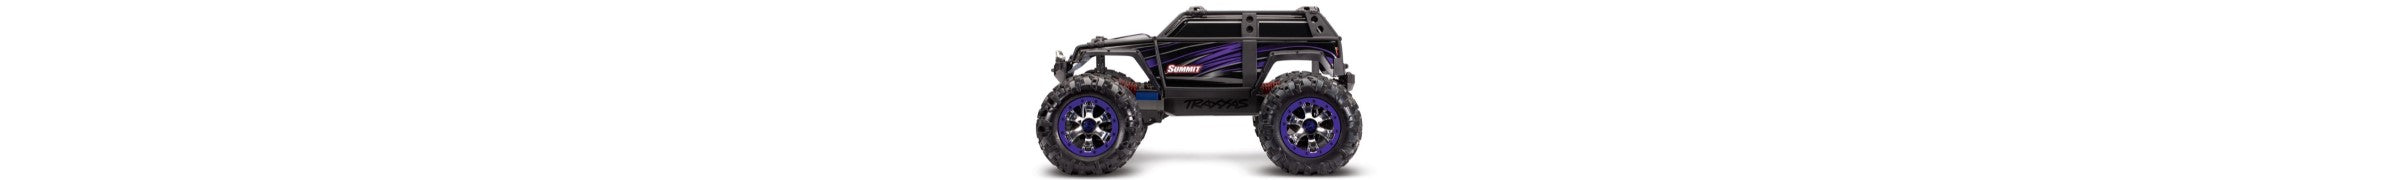 Parts For 56076-4 Traxxas Summit 1/10 4WD Electric RC Monster Truck